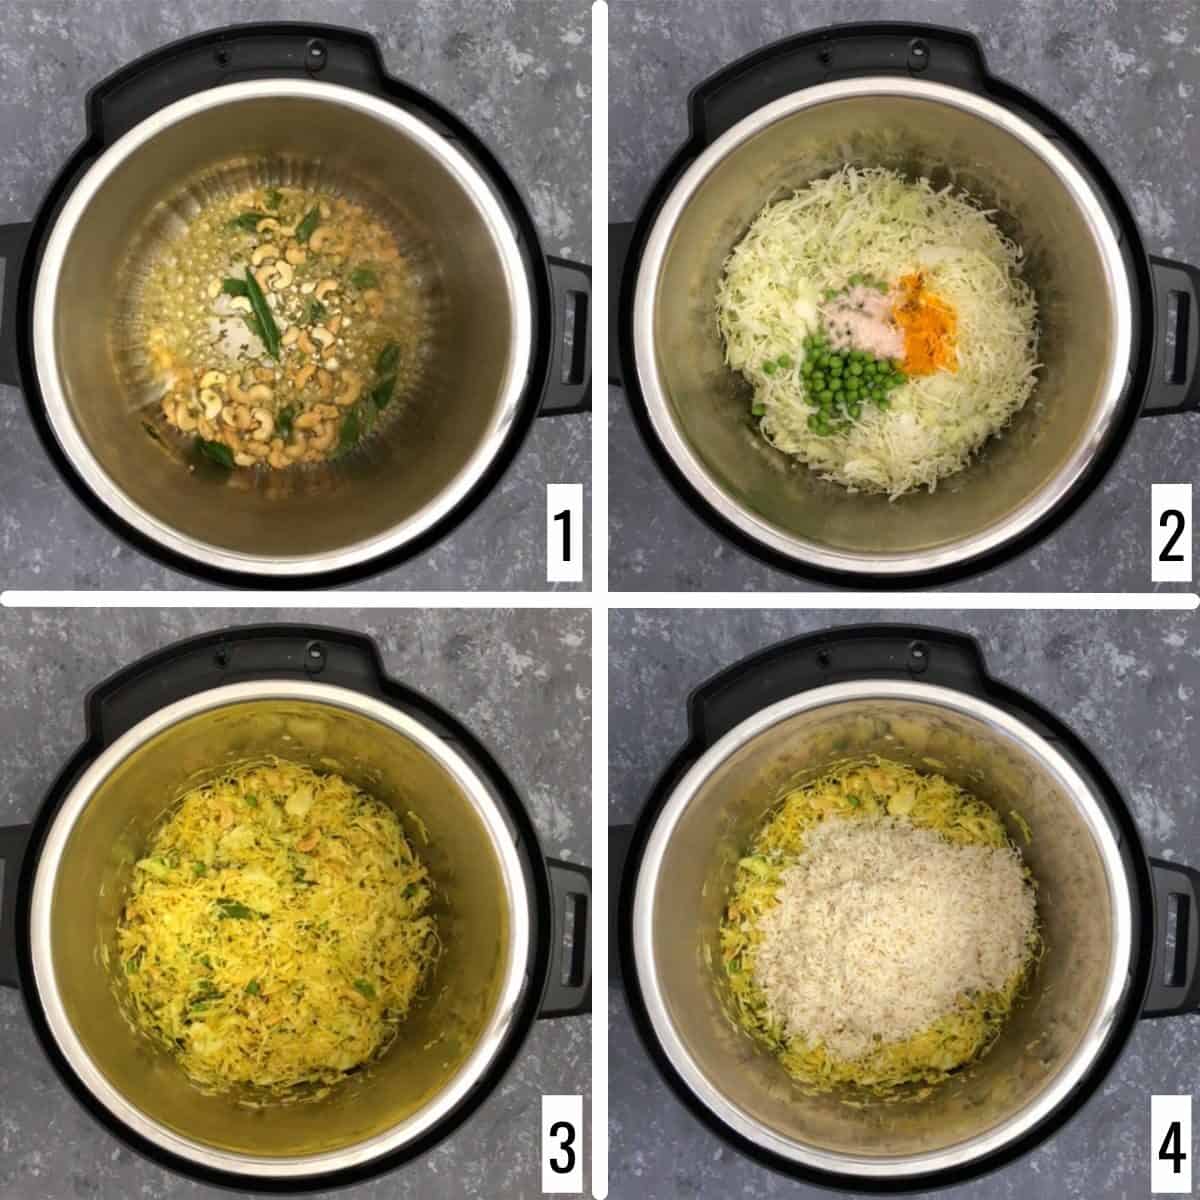 cabbage rice steps 1-4.